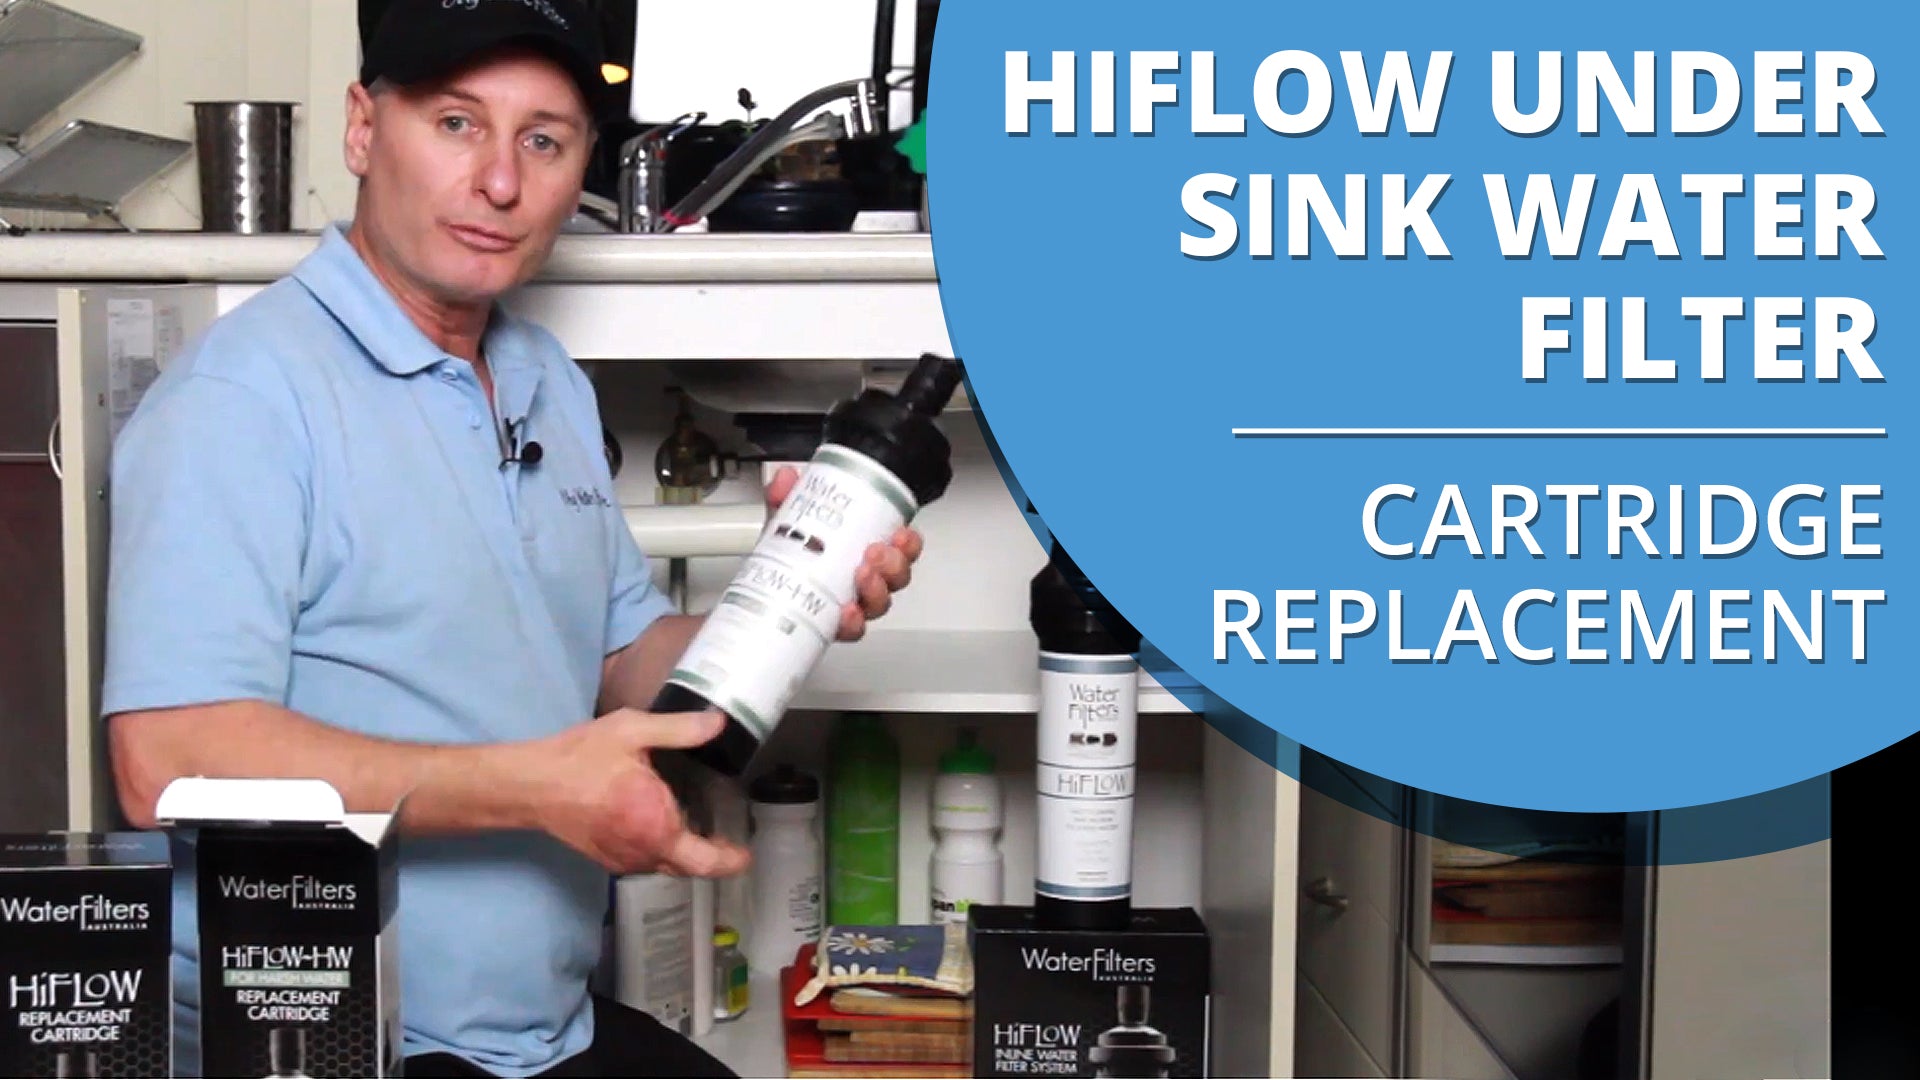 [VIDEO] How To Change The Cartridge In The HiFlow Inline Water Filter System